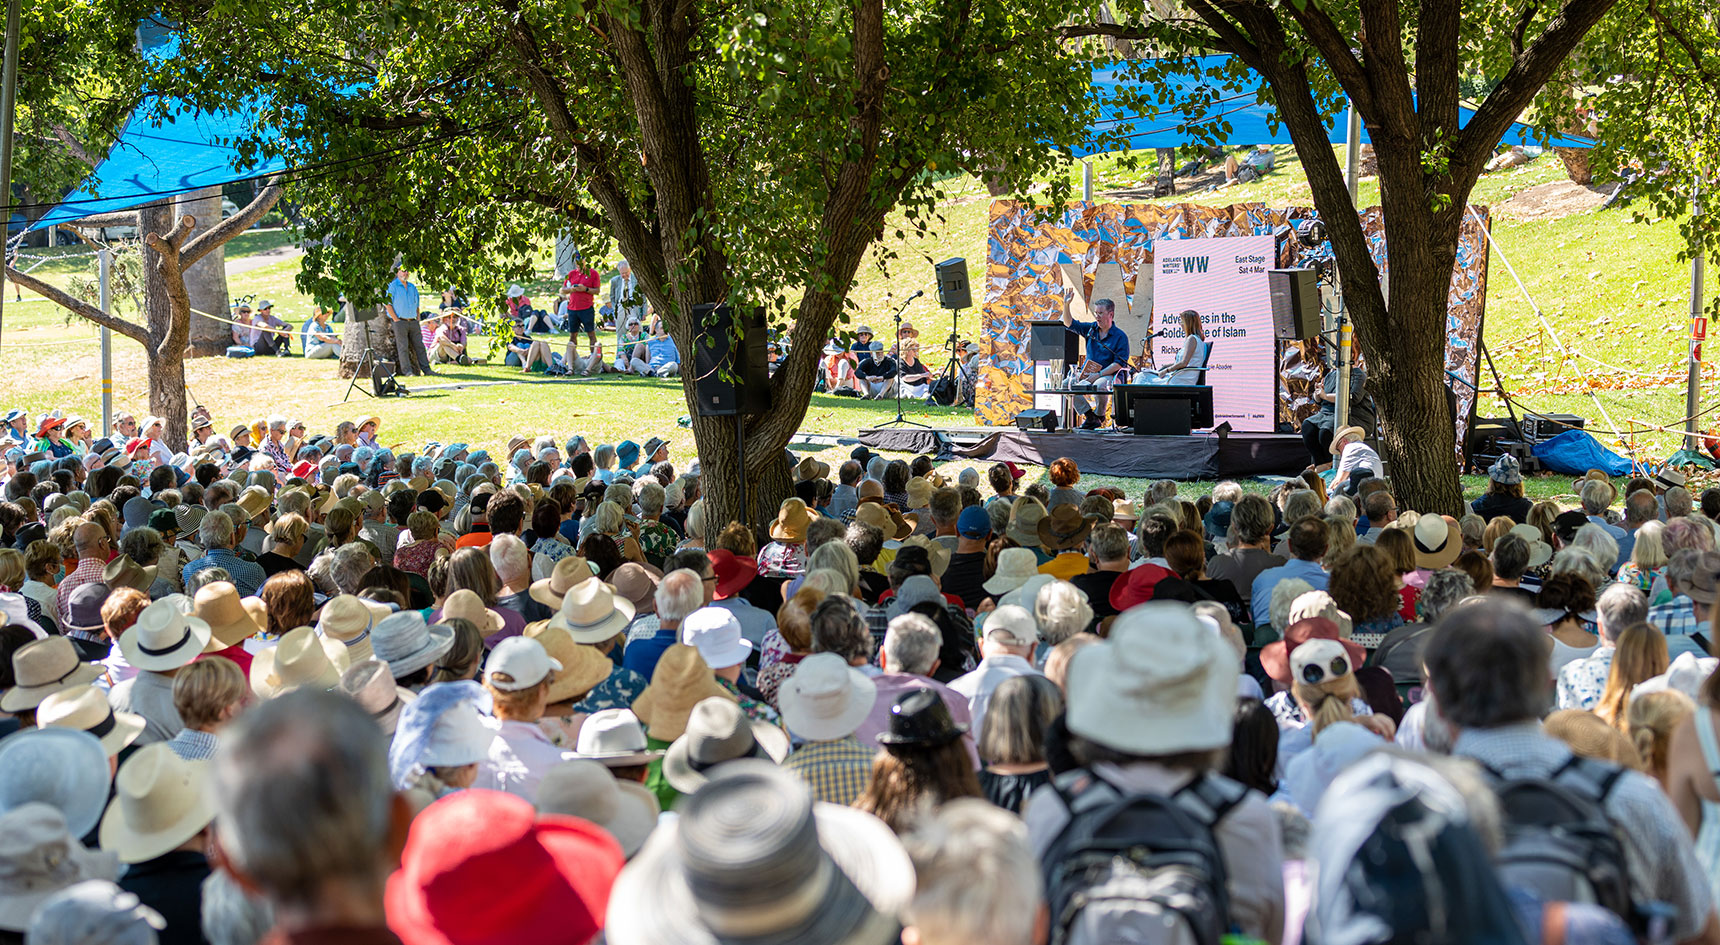 Crowd in front of the Adelaide Writers' Week stage